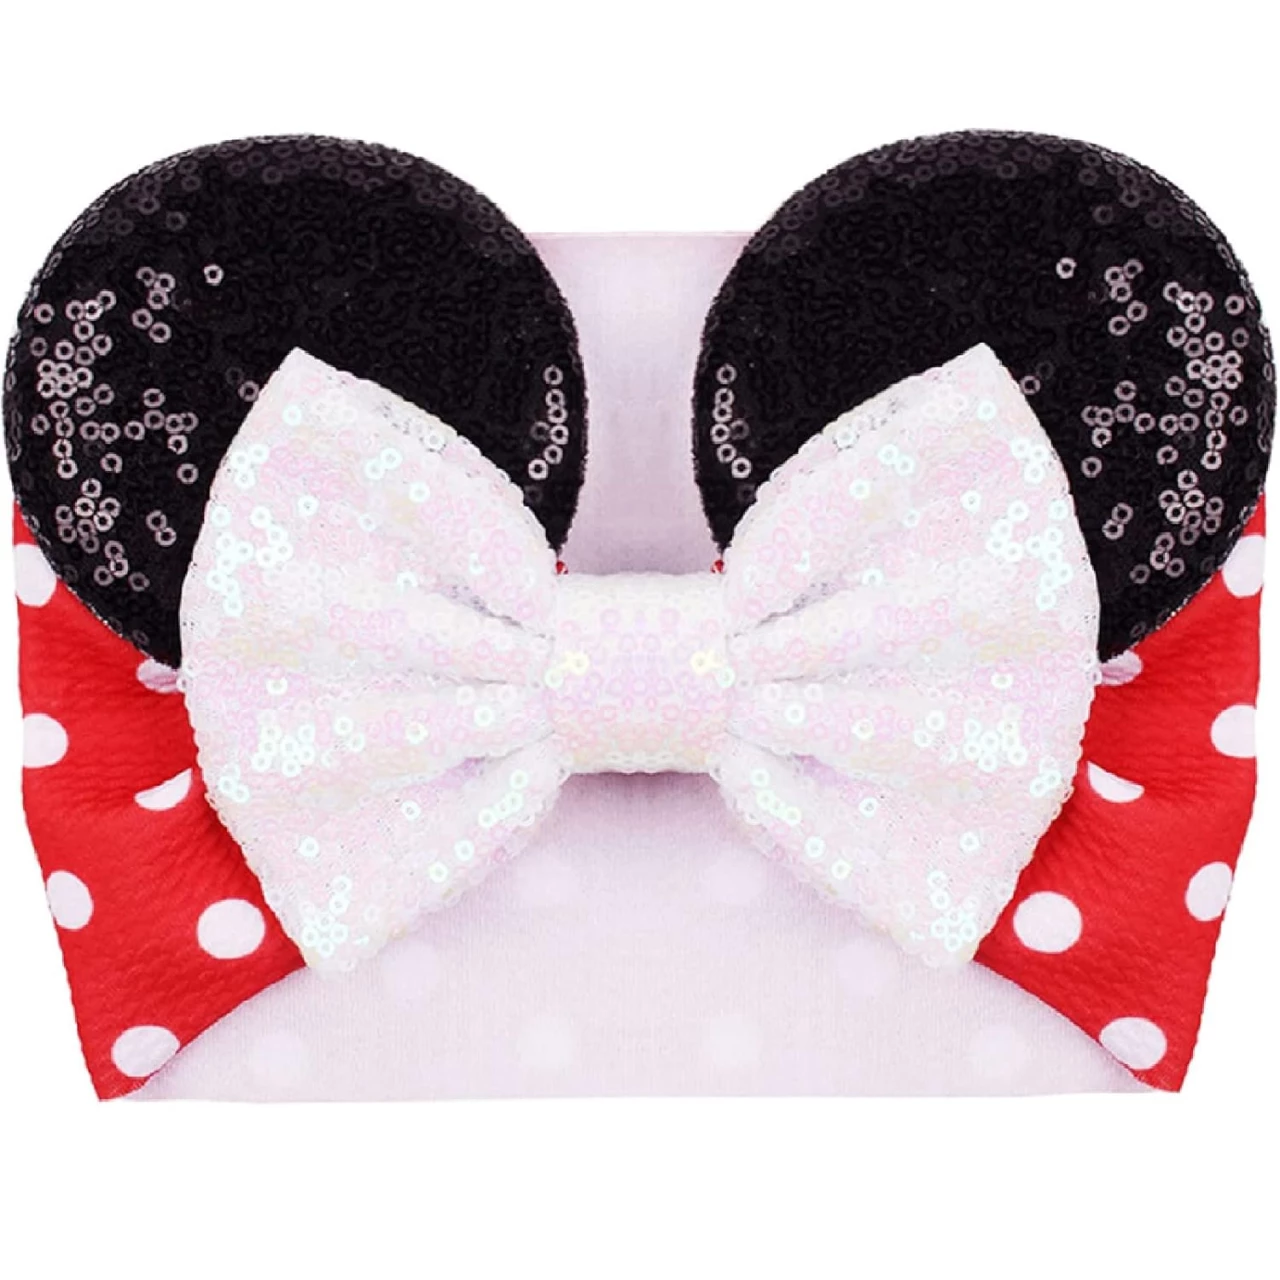 Kiszu Sparkle Mouse Ears Baby Girl Headband with Bow Waffle Red White Dots Turban Headwear for Newbron Infant Toddler Kids Head Decorations Gift